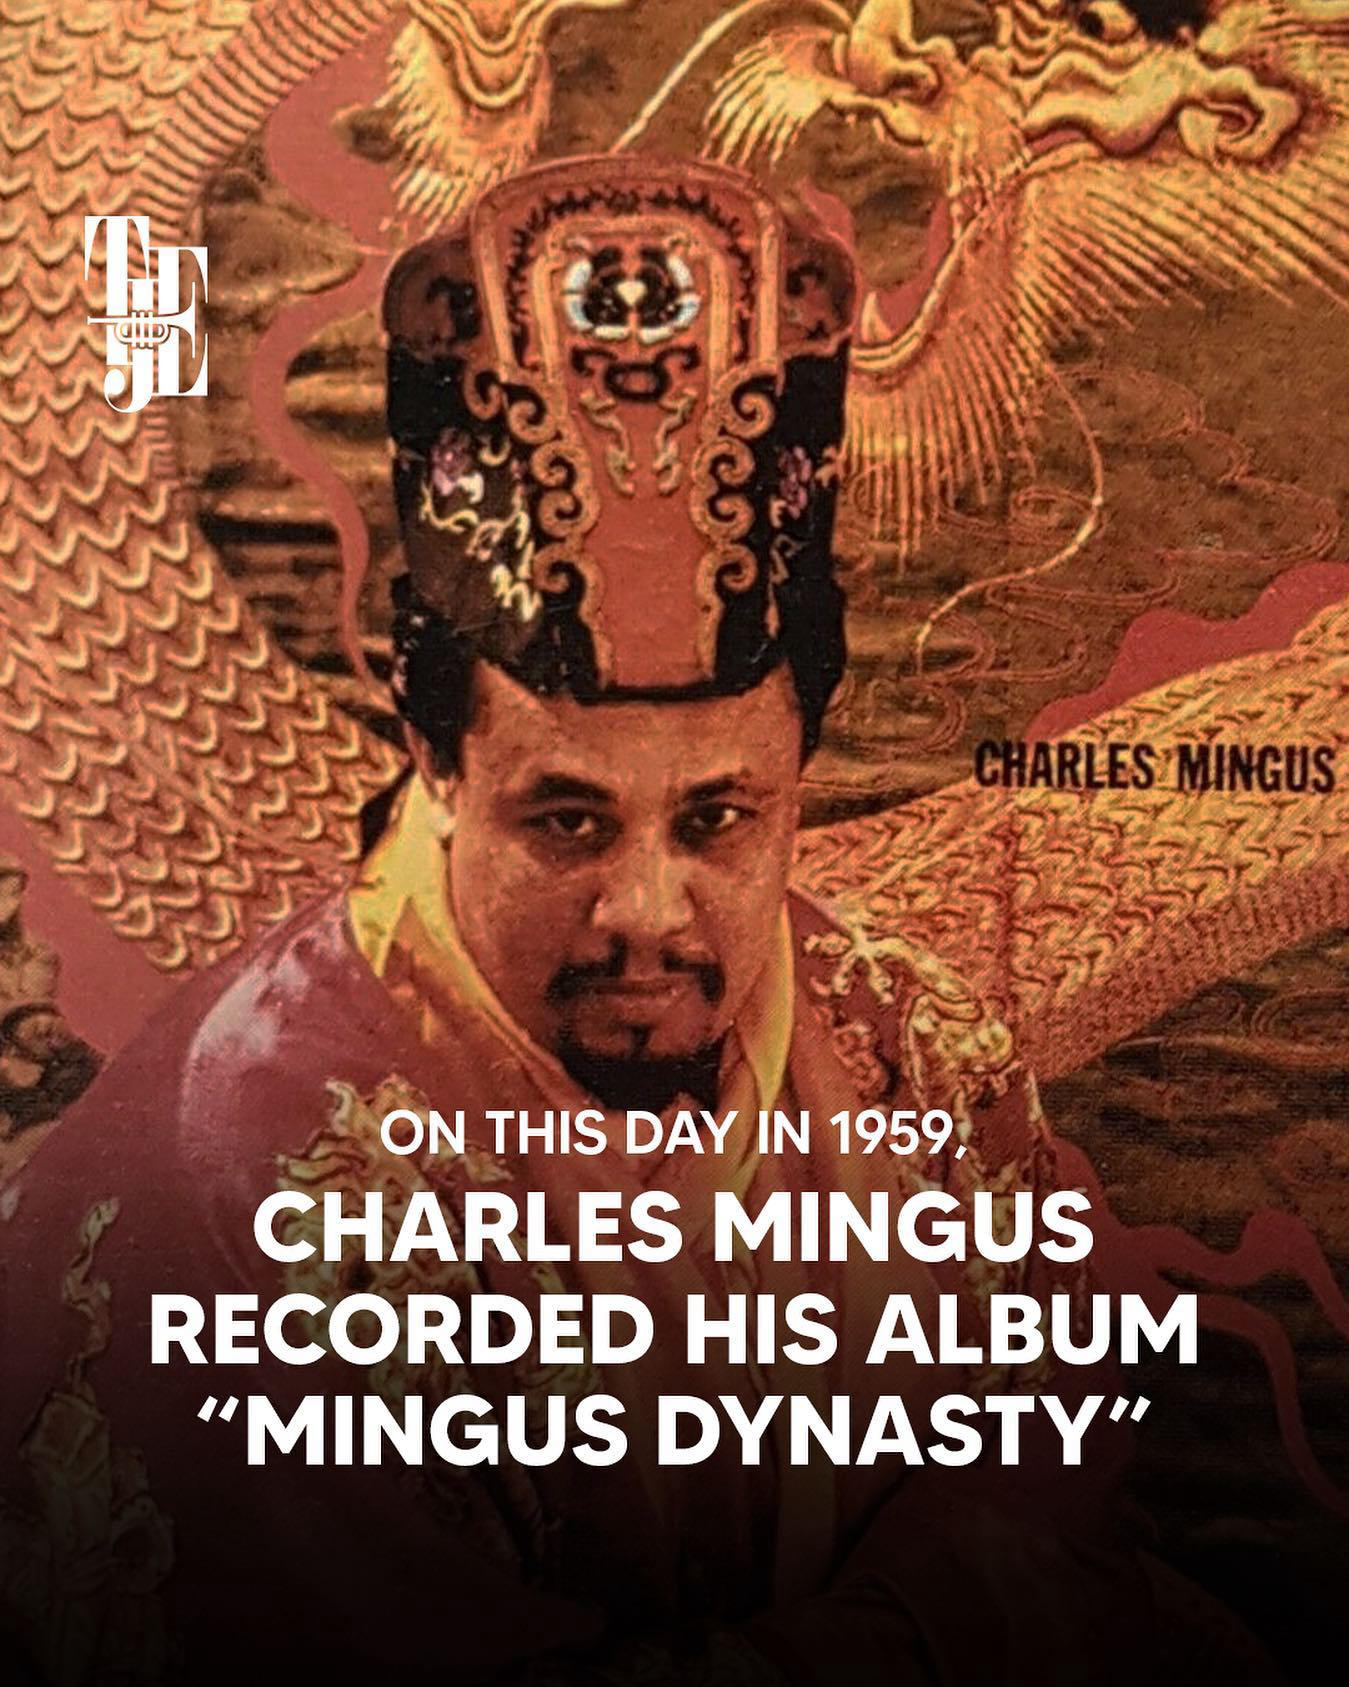 image  1 The Jazz Estate - On this day in 1959, bassist and composer Charles Mingus recorded his famous album